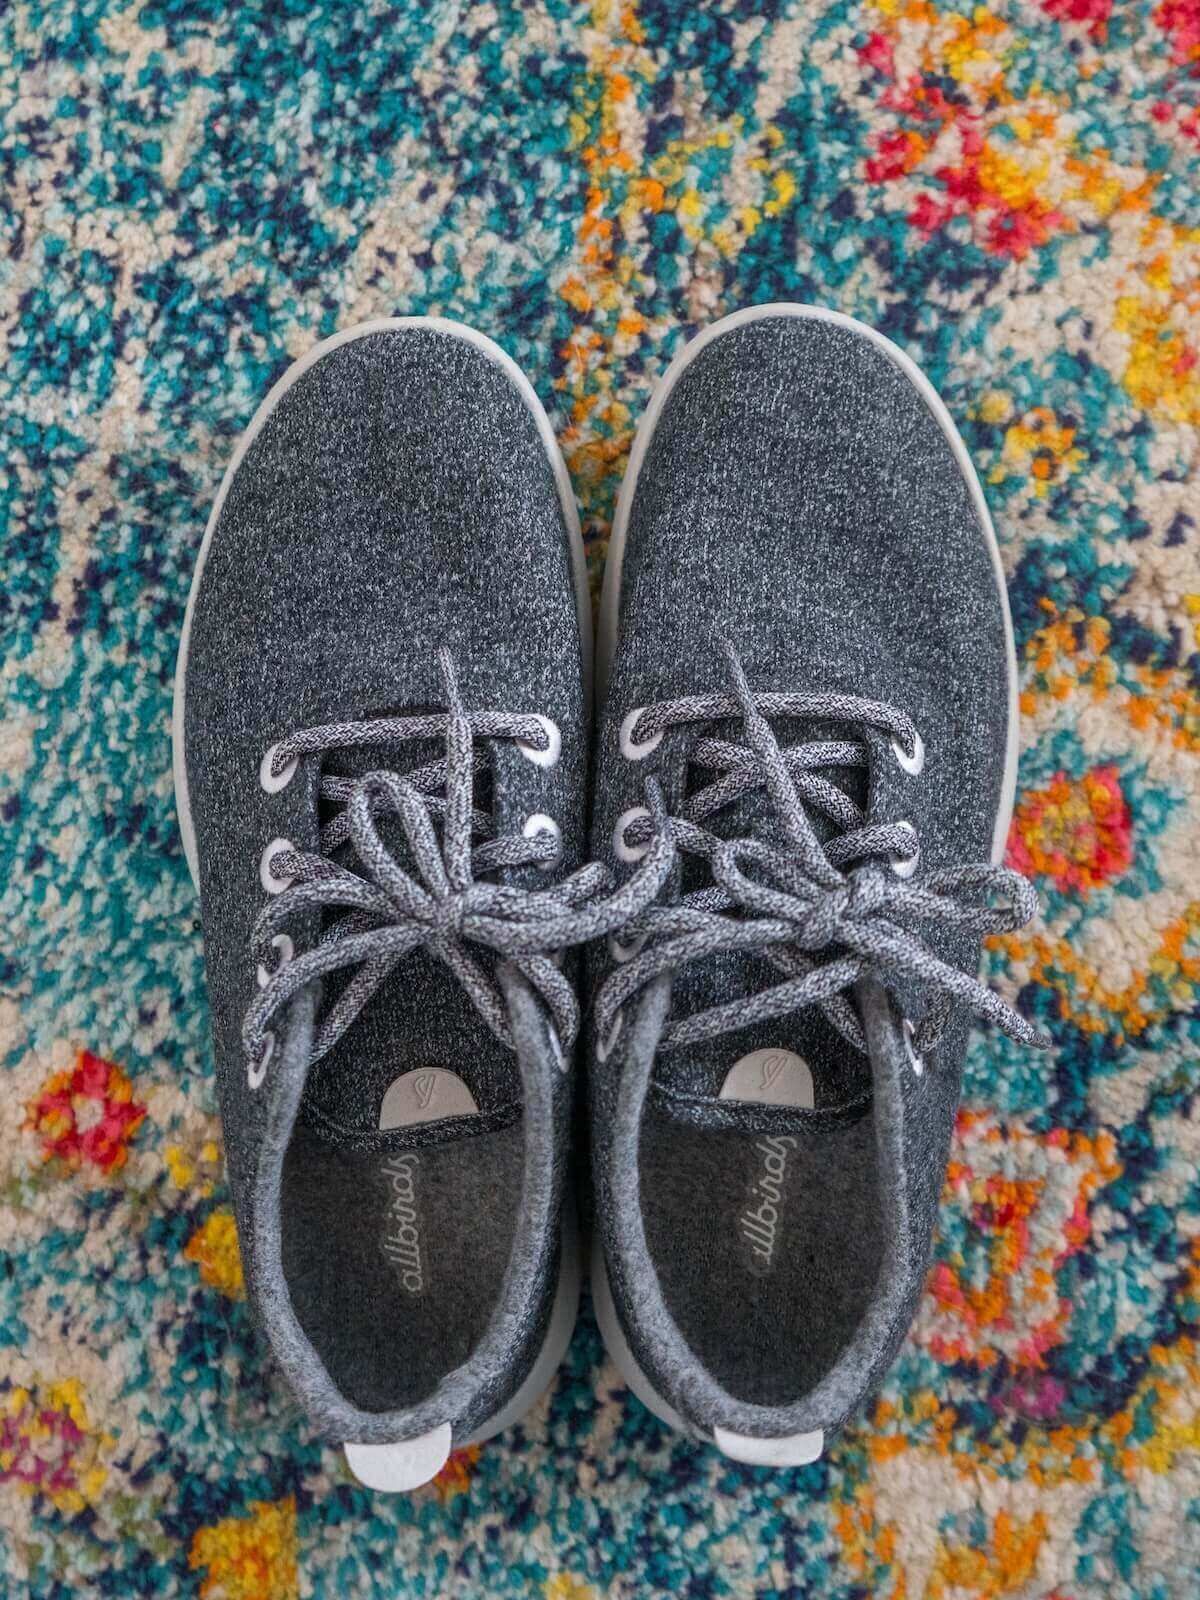 A pair of brand new grey sneakers seen from above, sitting on a patterned, multi-colored rug.